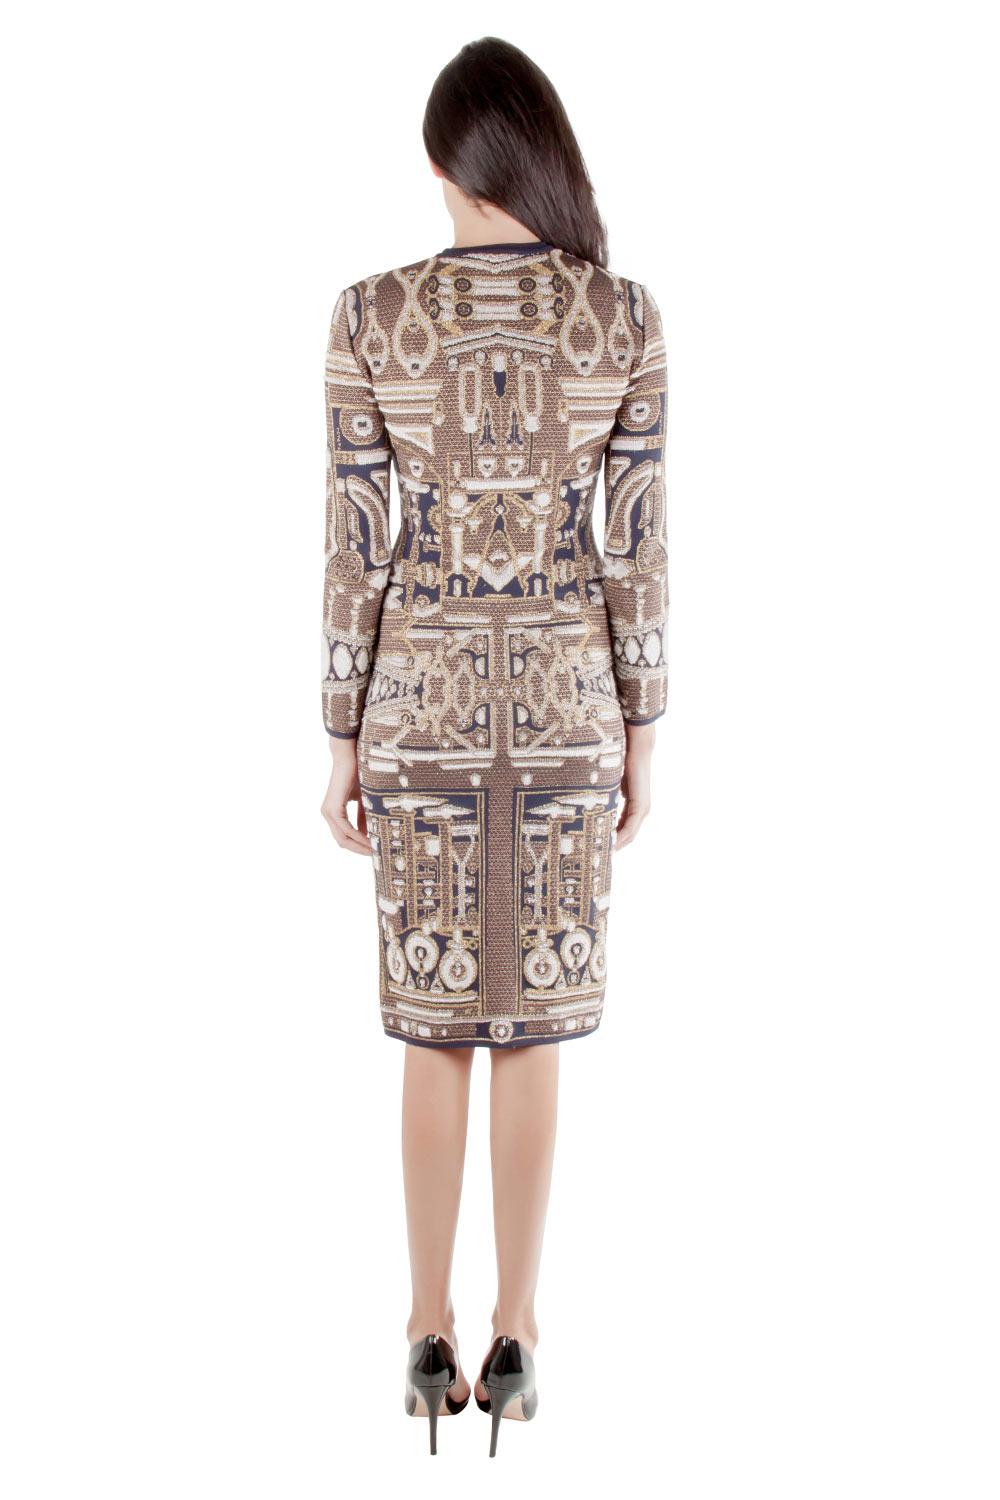 An interesting print combines with a sharp silhouette to give you this amazing Mary Katrantzou dress. It has long sleeves and a round neckline. The comfortable midi length makes it look great with pointed heels.

Includes: The Luxury Closet